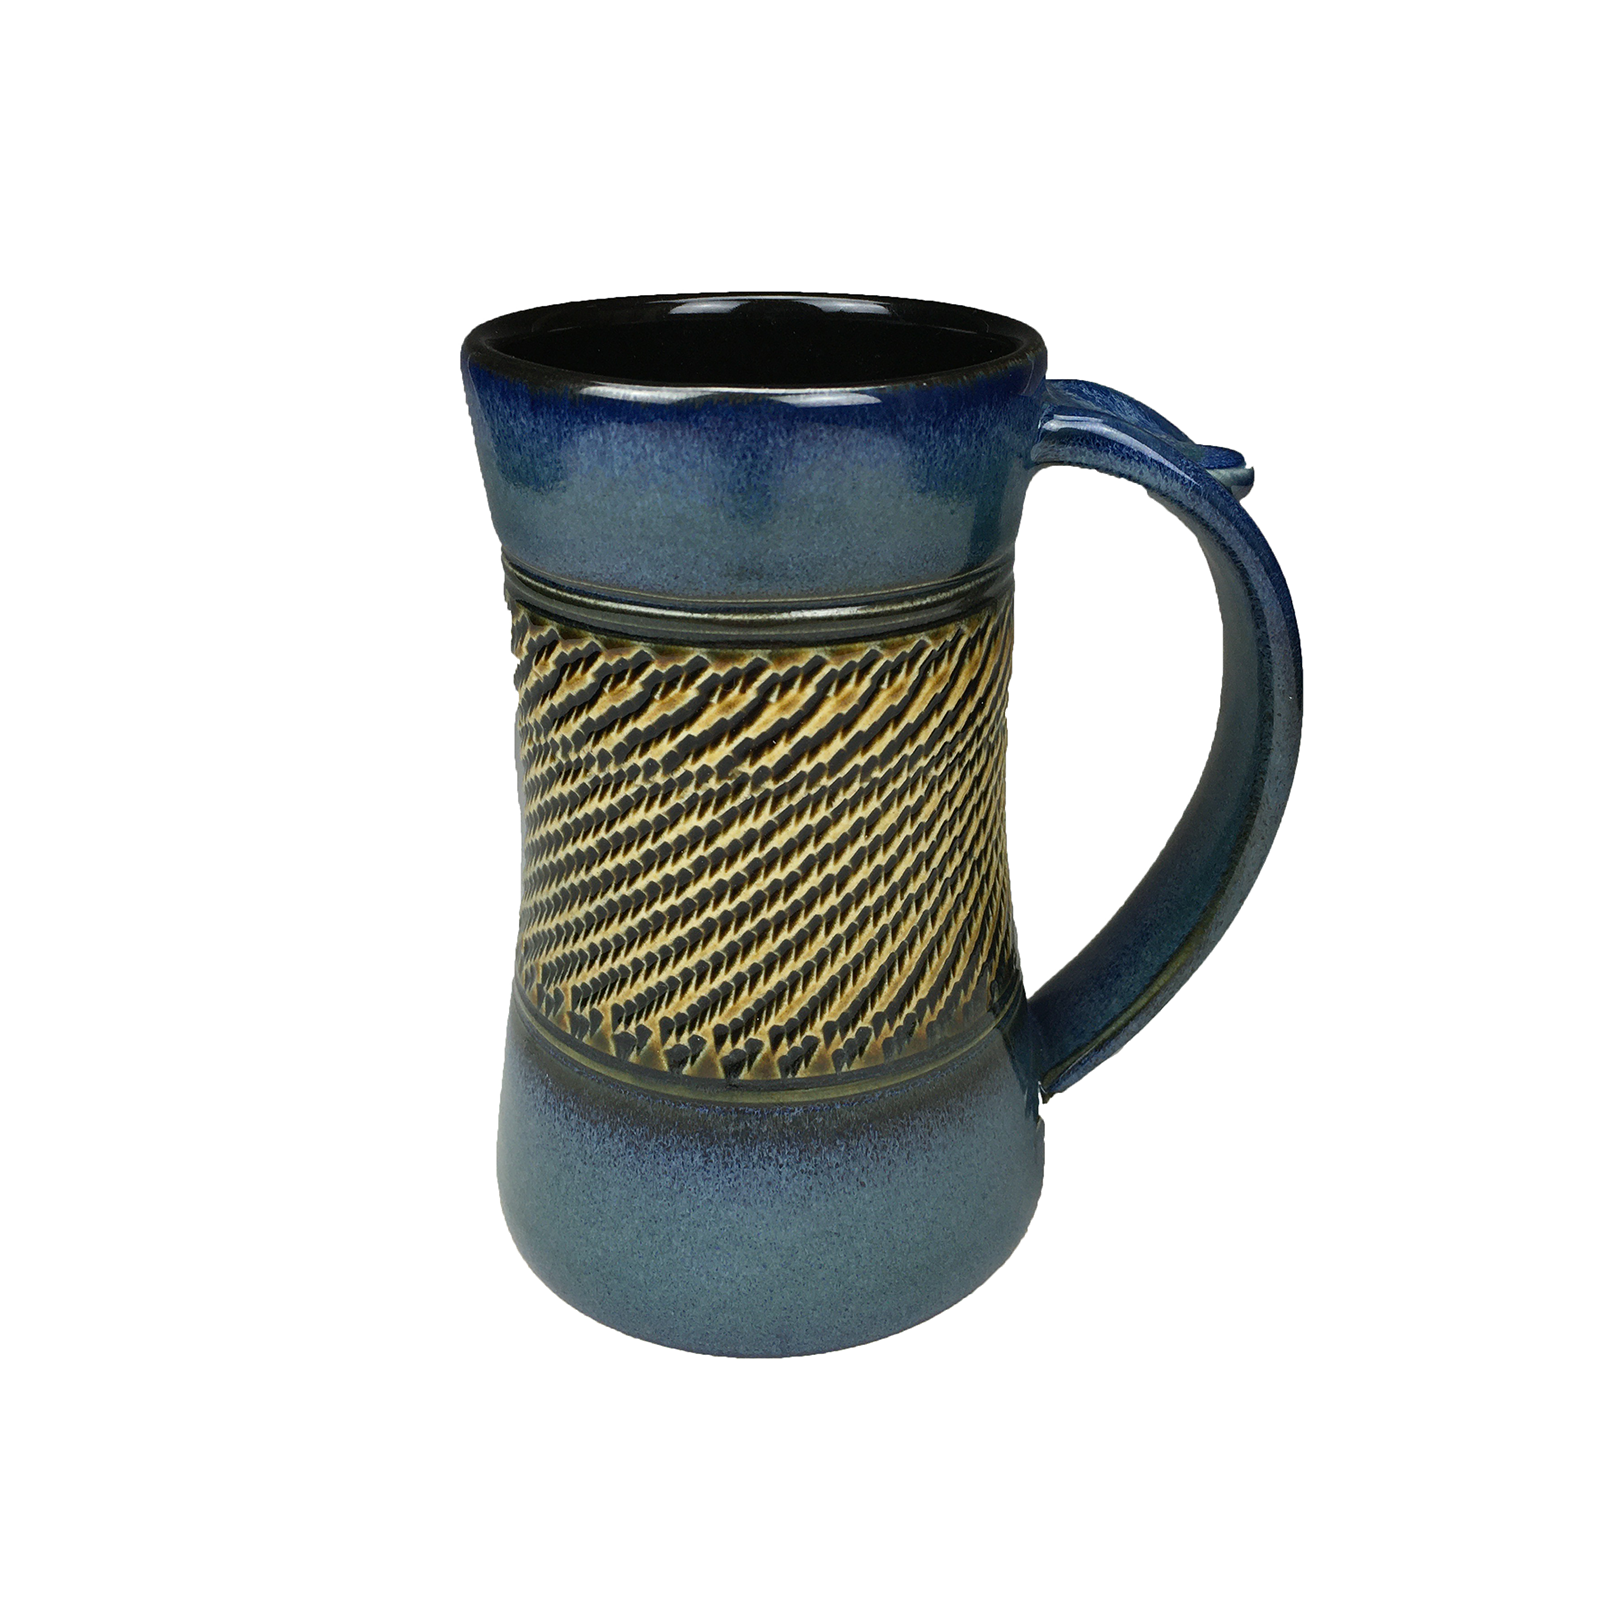 Chatter coffee mug from Tahoe Blue Pottery